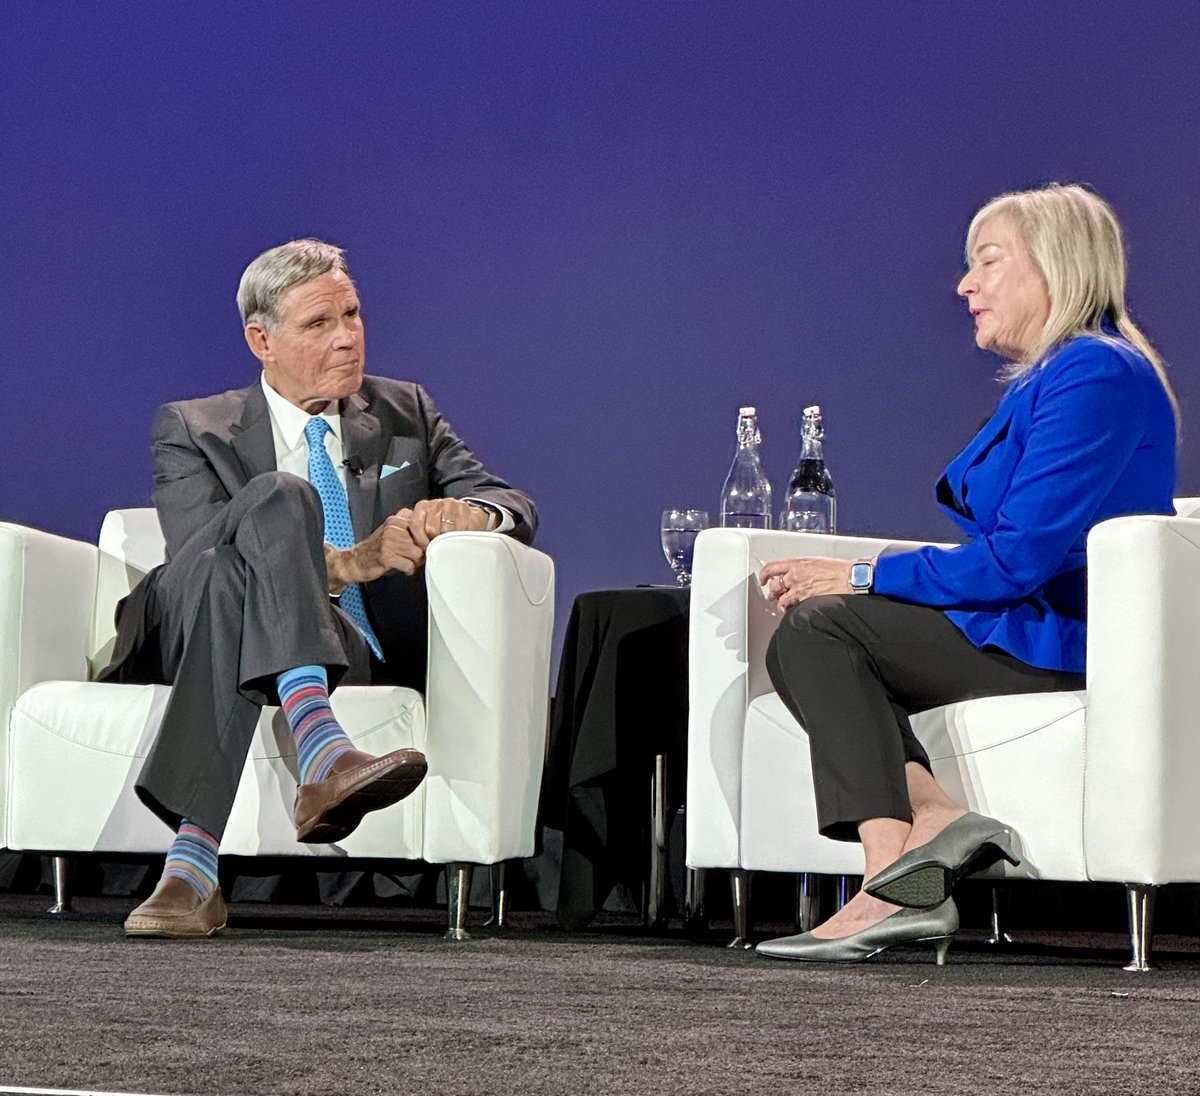 Incredible master class on #AI by @EricTopol @ACPIMPhysicians annual meeting. He reviewed the rapidly growing body of evidence and the need for real-world evidence in clinical practice. Thank you @DarilynMoyer for your leadership!